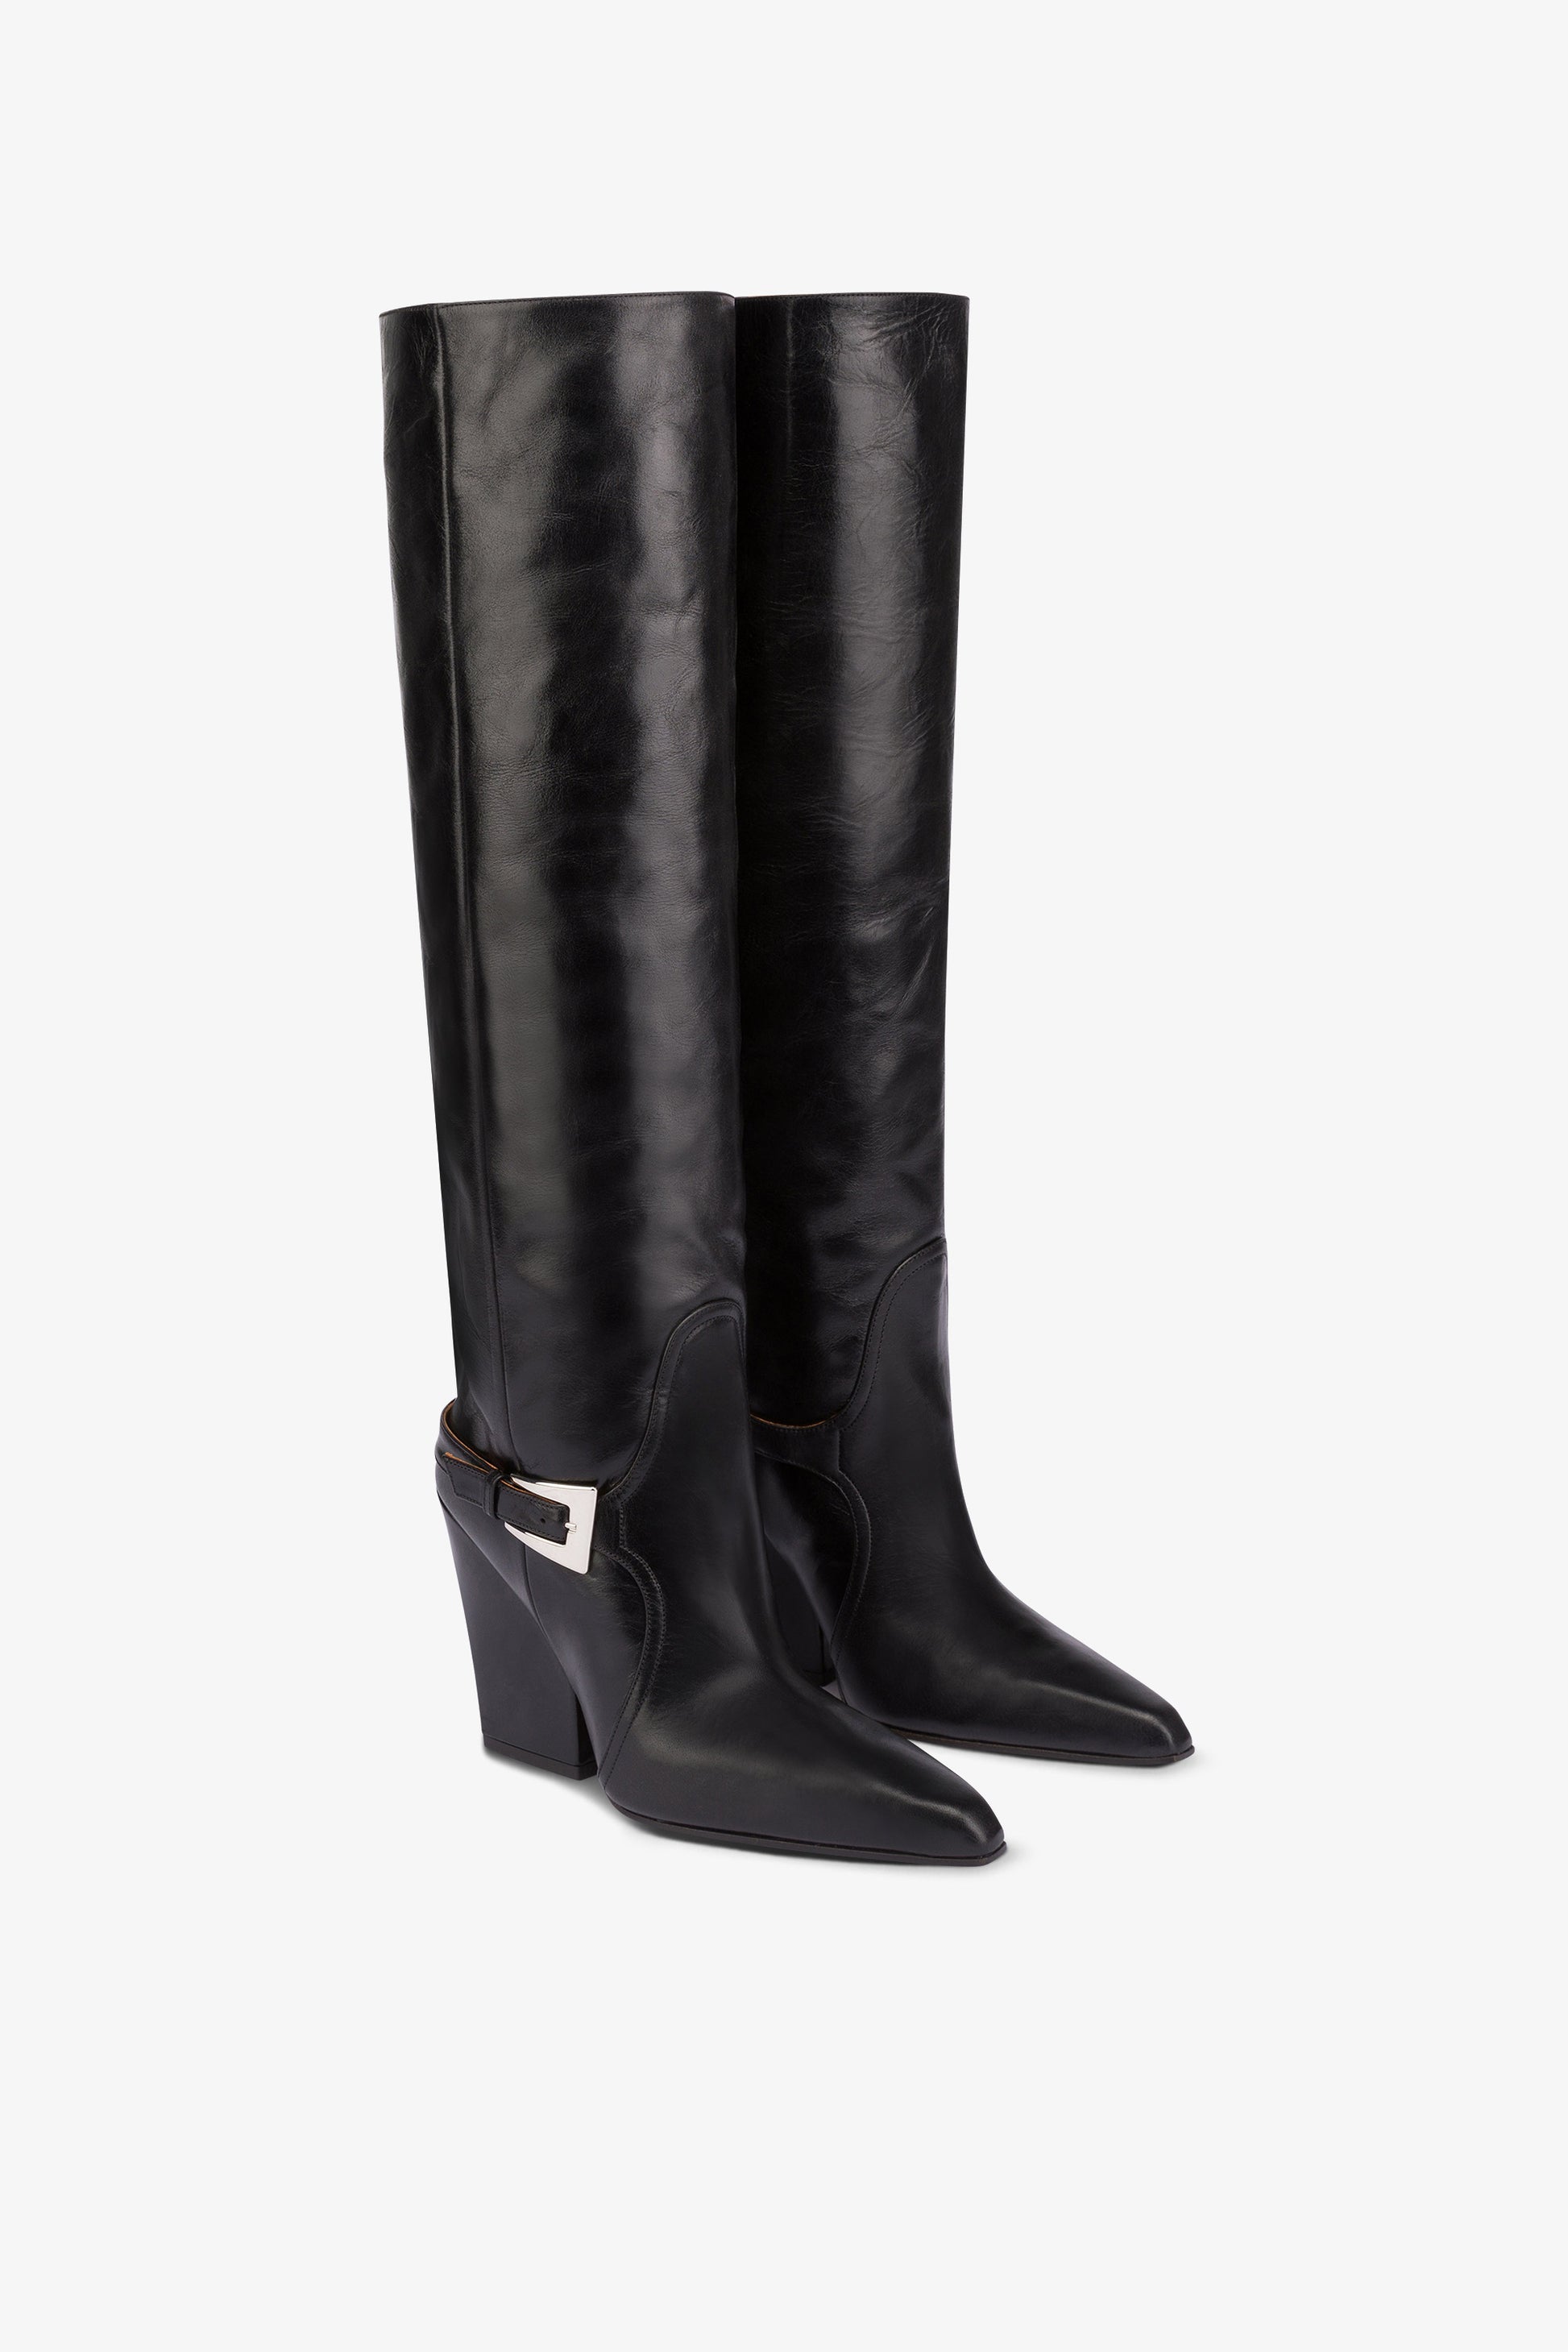 Tall, knee-high boots in shiny black vintage leather